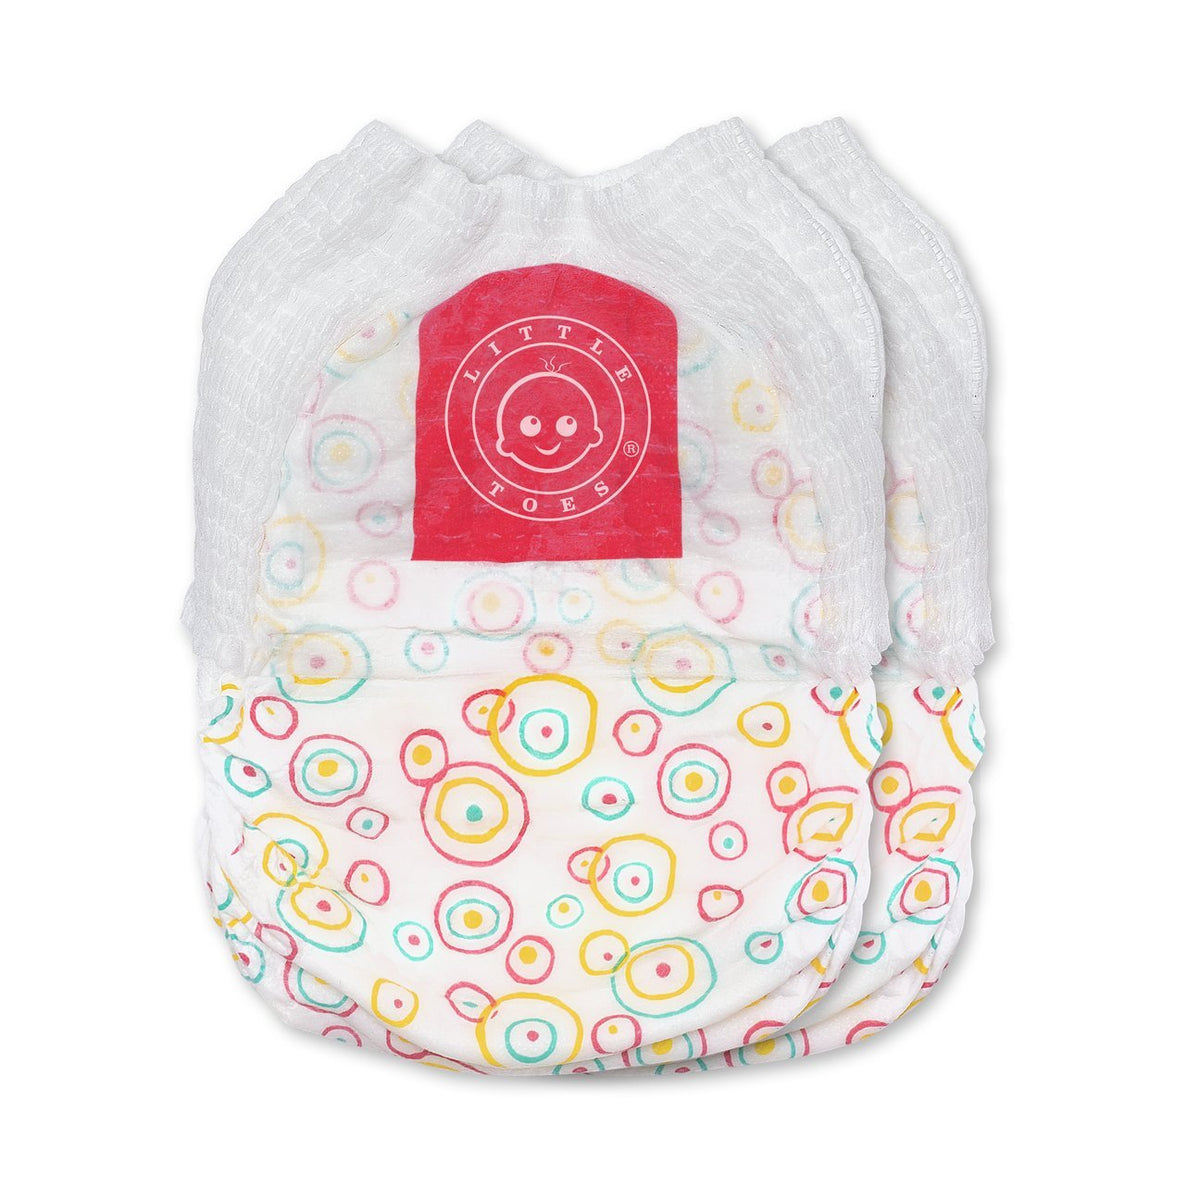 Little Toes Convenience On The Go 2x Swimmy Diapers large size pack